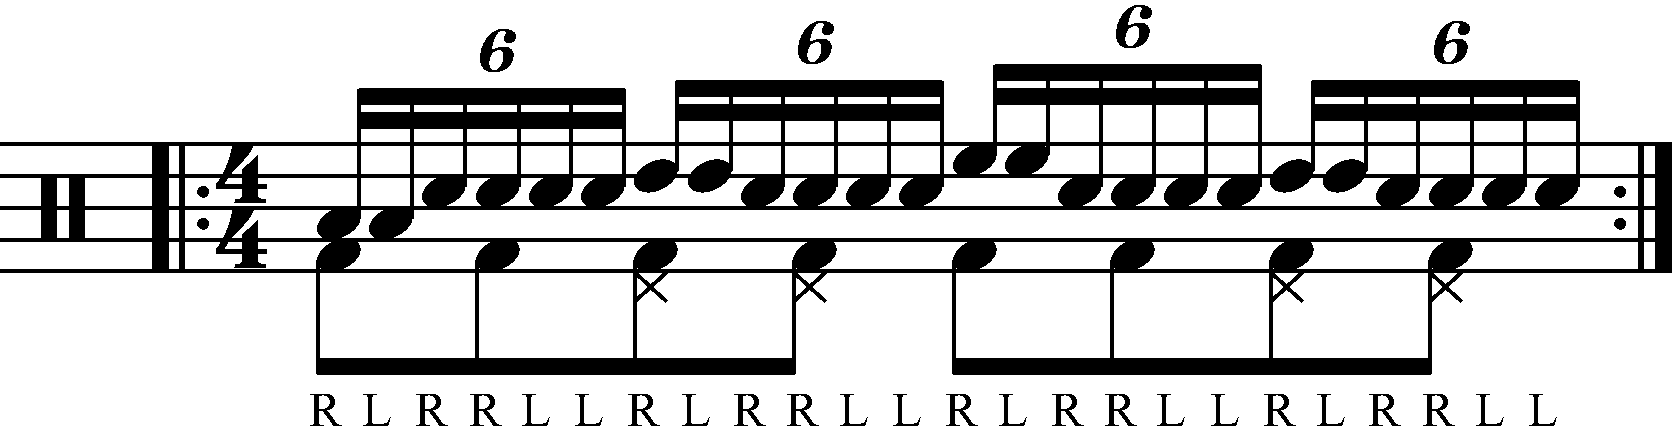 Paradiddle Diddle with moving single strokes